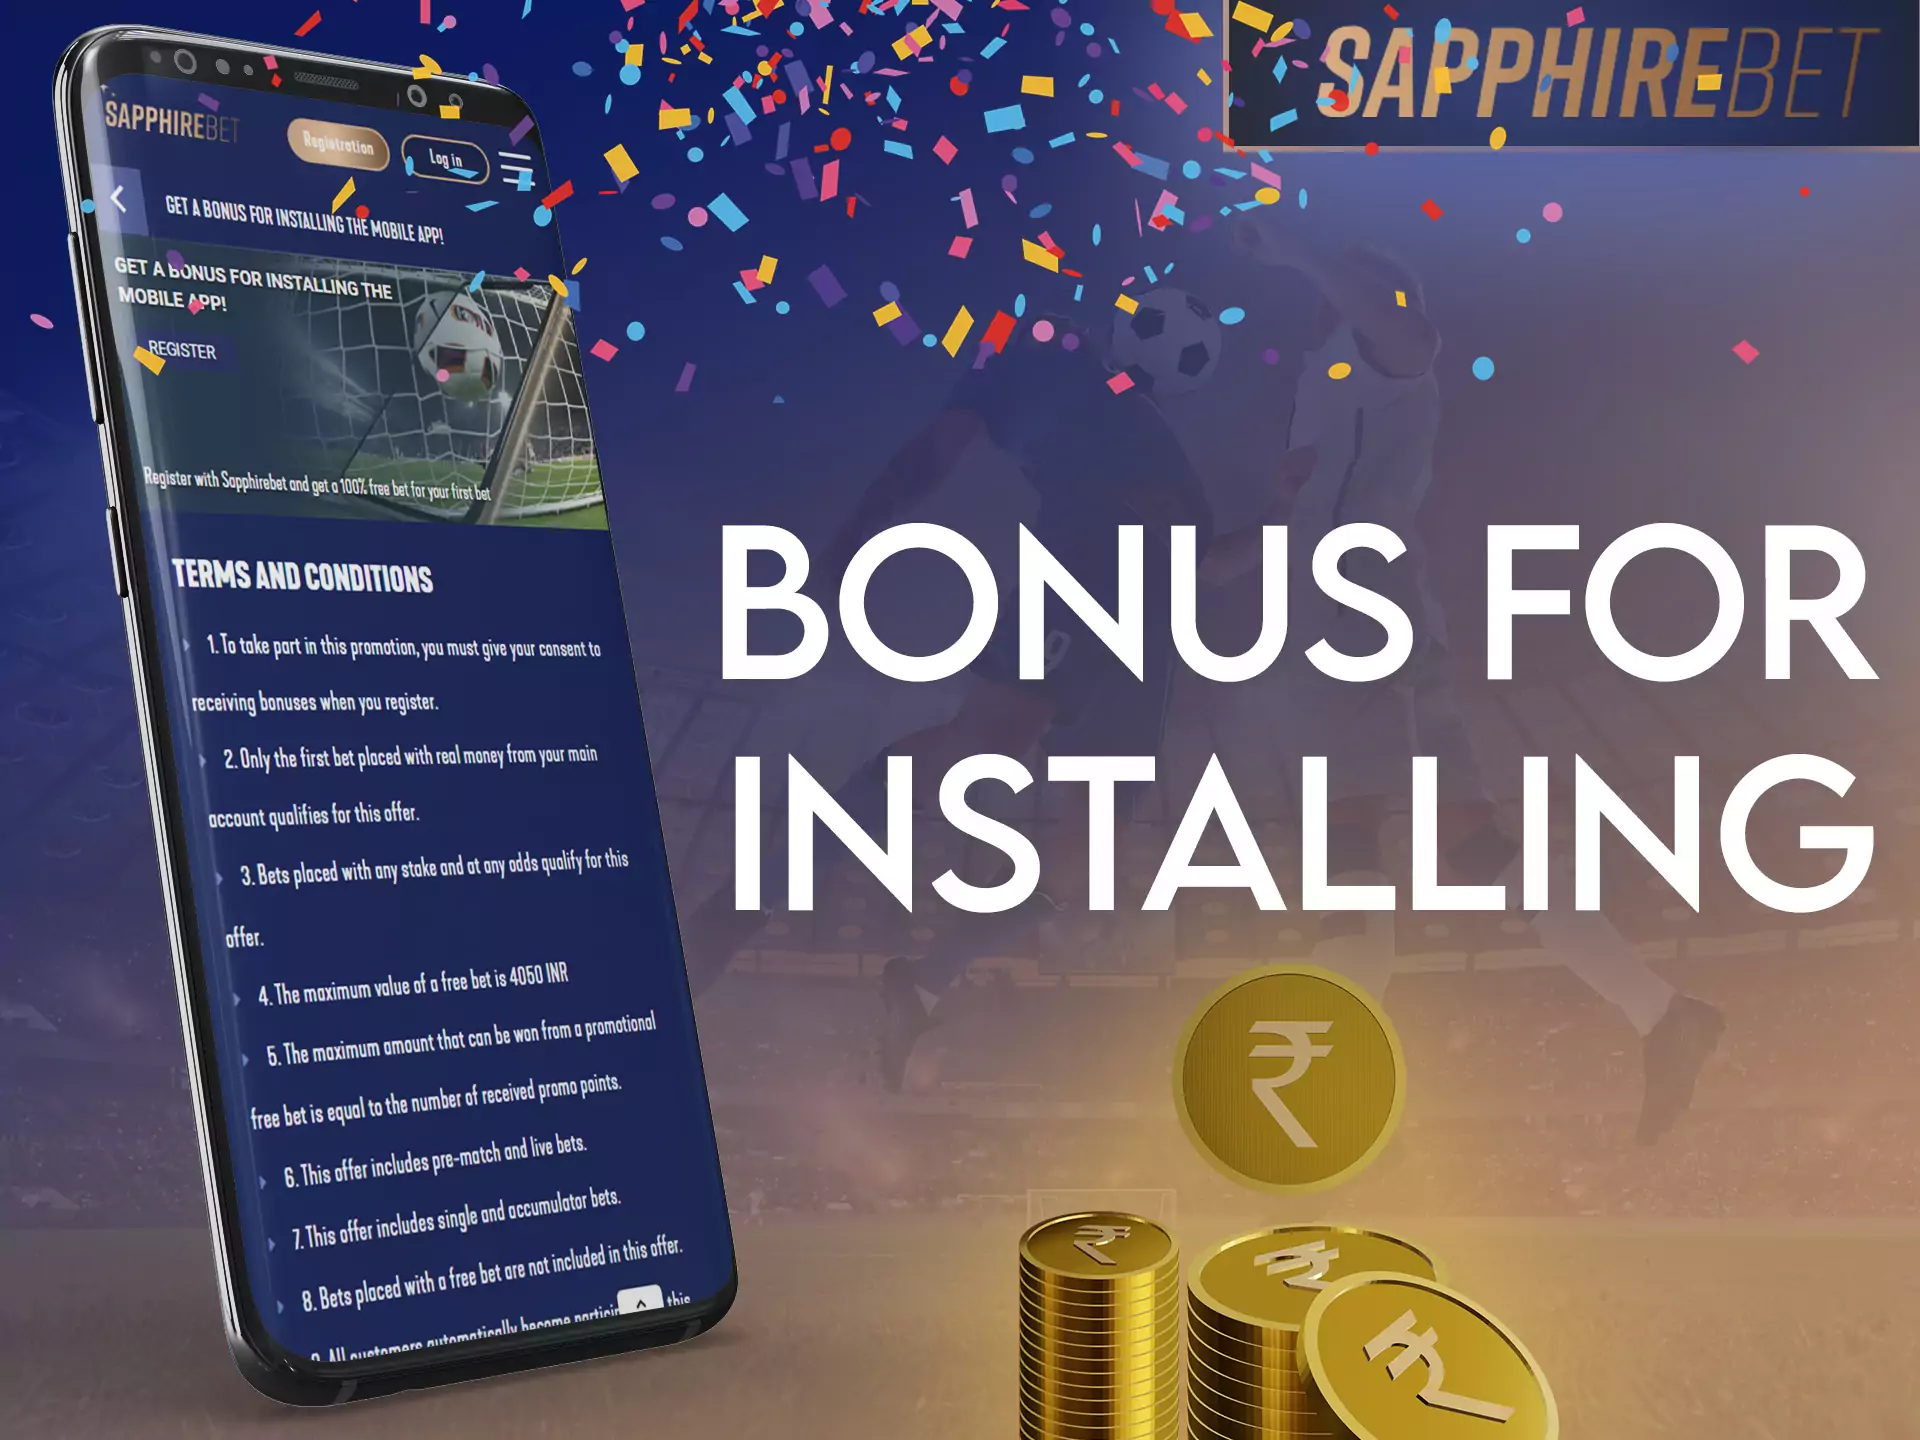 In the Sapphirebet app, get a special bonus for installation.